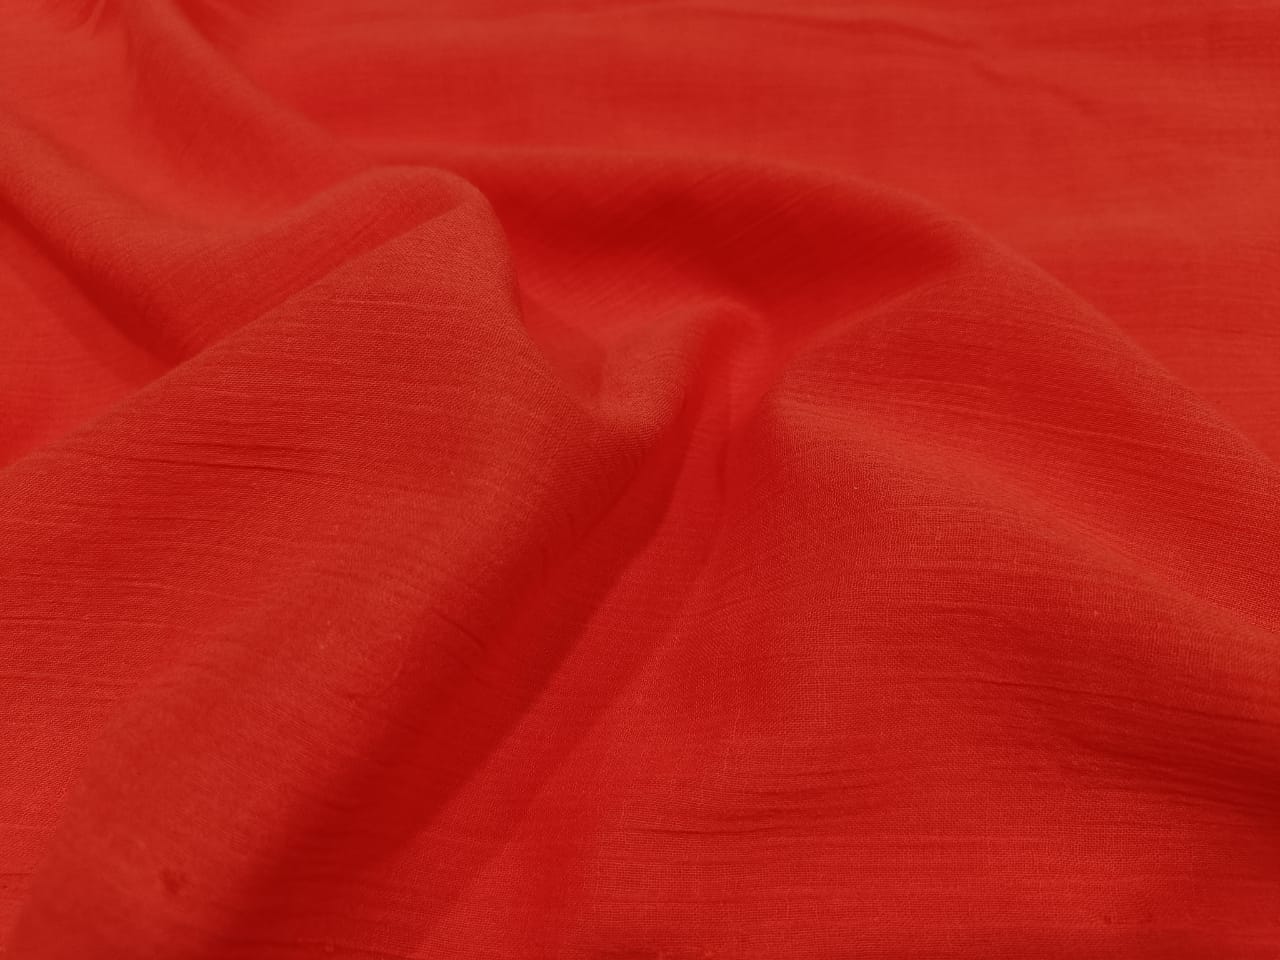 Cotton crush crepe deep orange color fabric 58" wide available in 2 colors deep orange and black